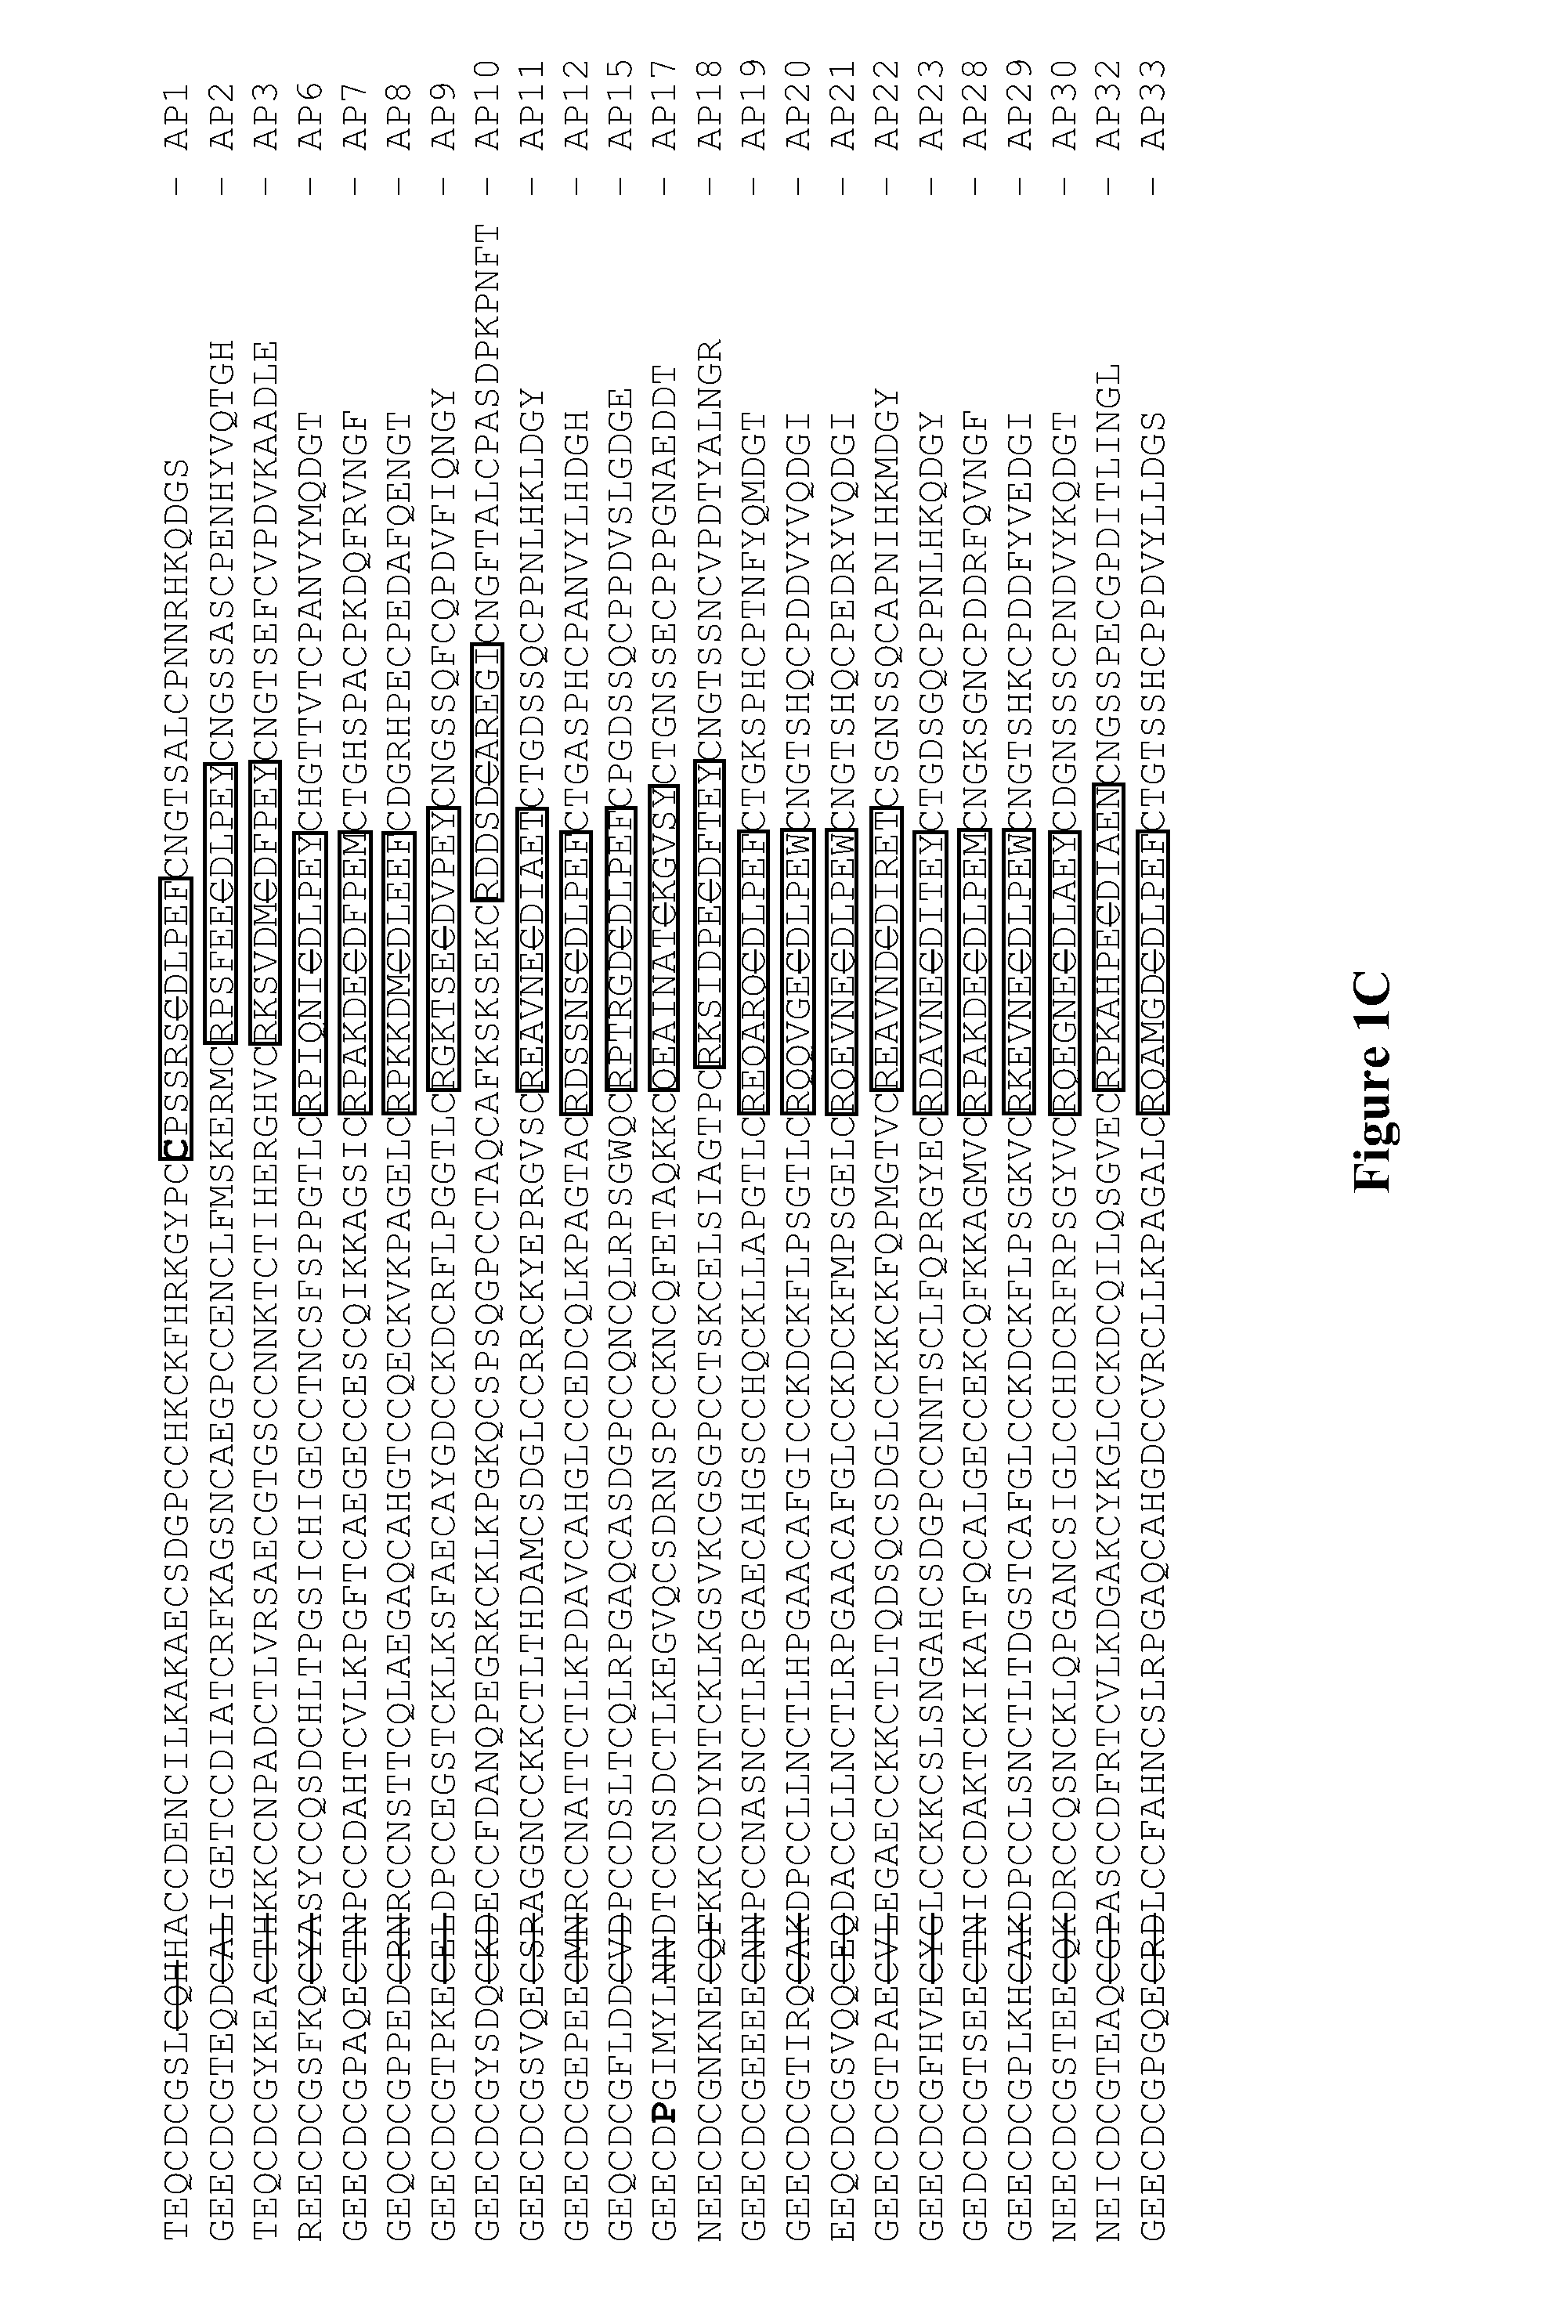 Modified adam disintegrin domain polypeptides and uses thereof